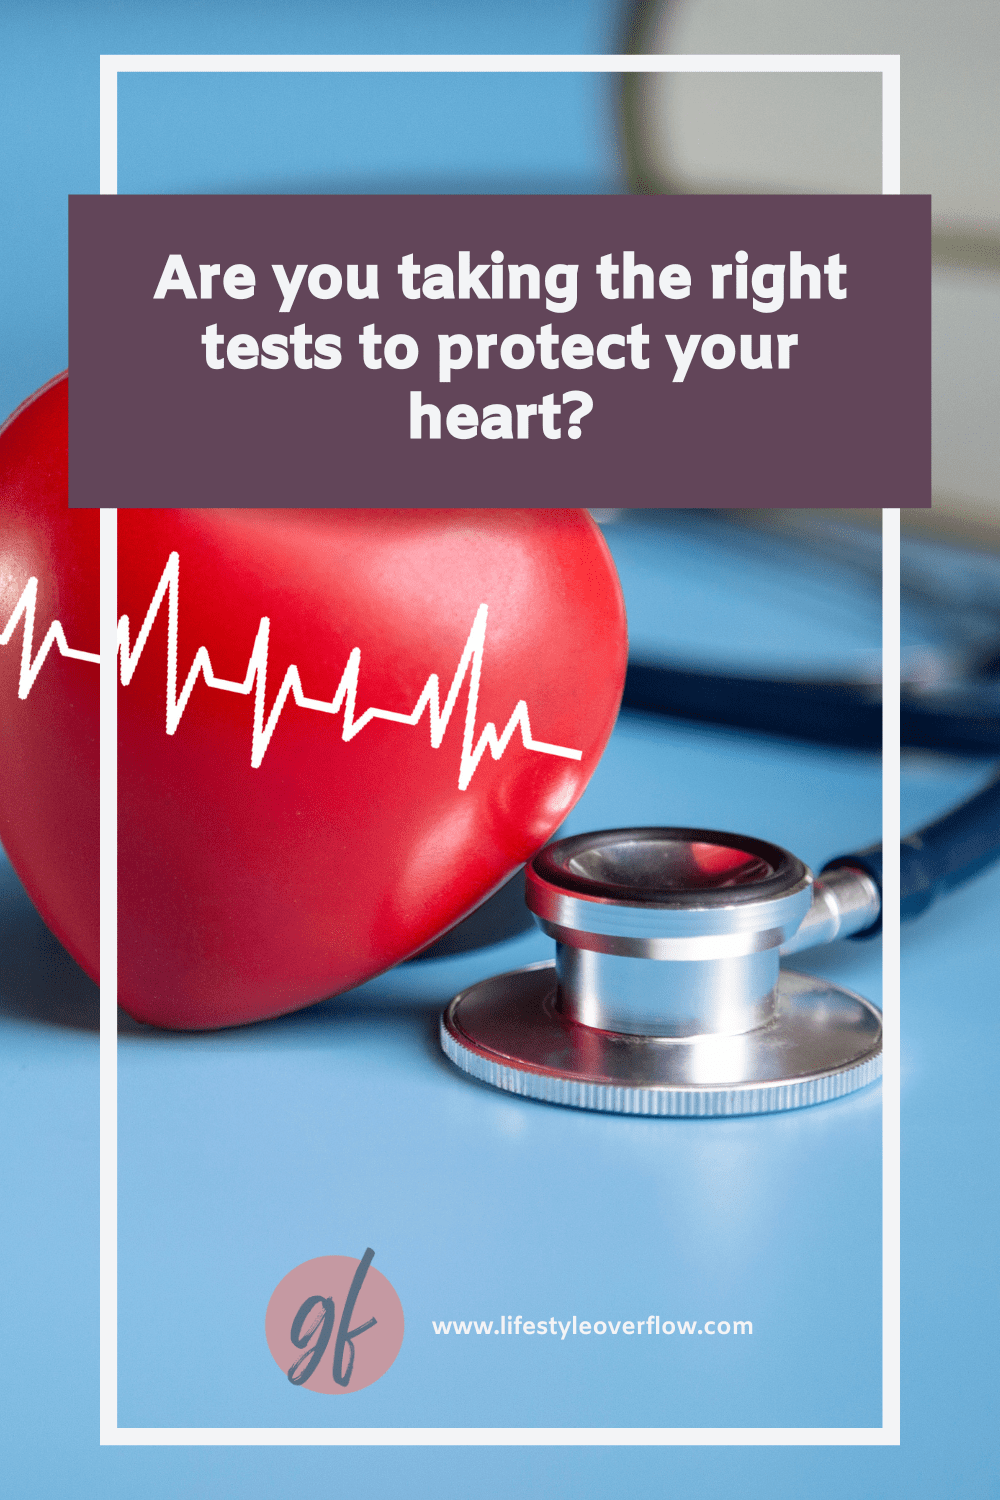 A photo of a stethoscope and a fake heart with a block of text: are you taking the right tests to protect your heart?